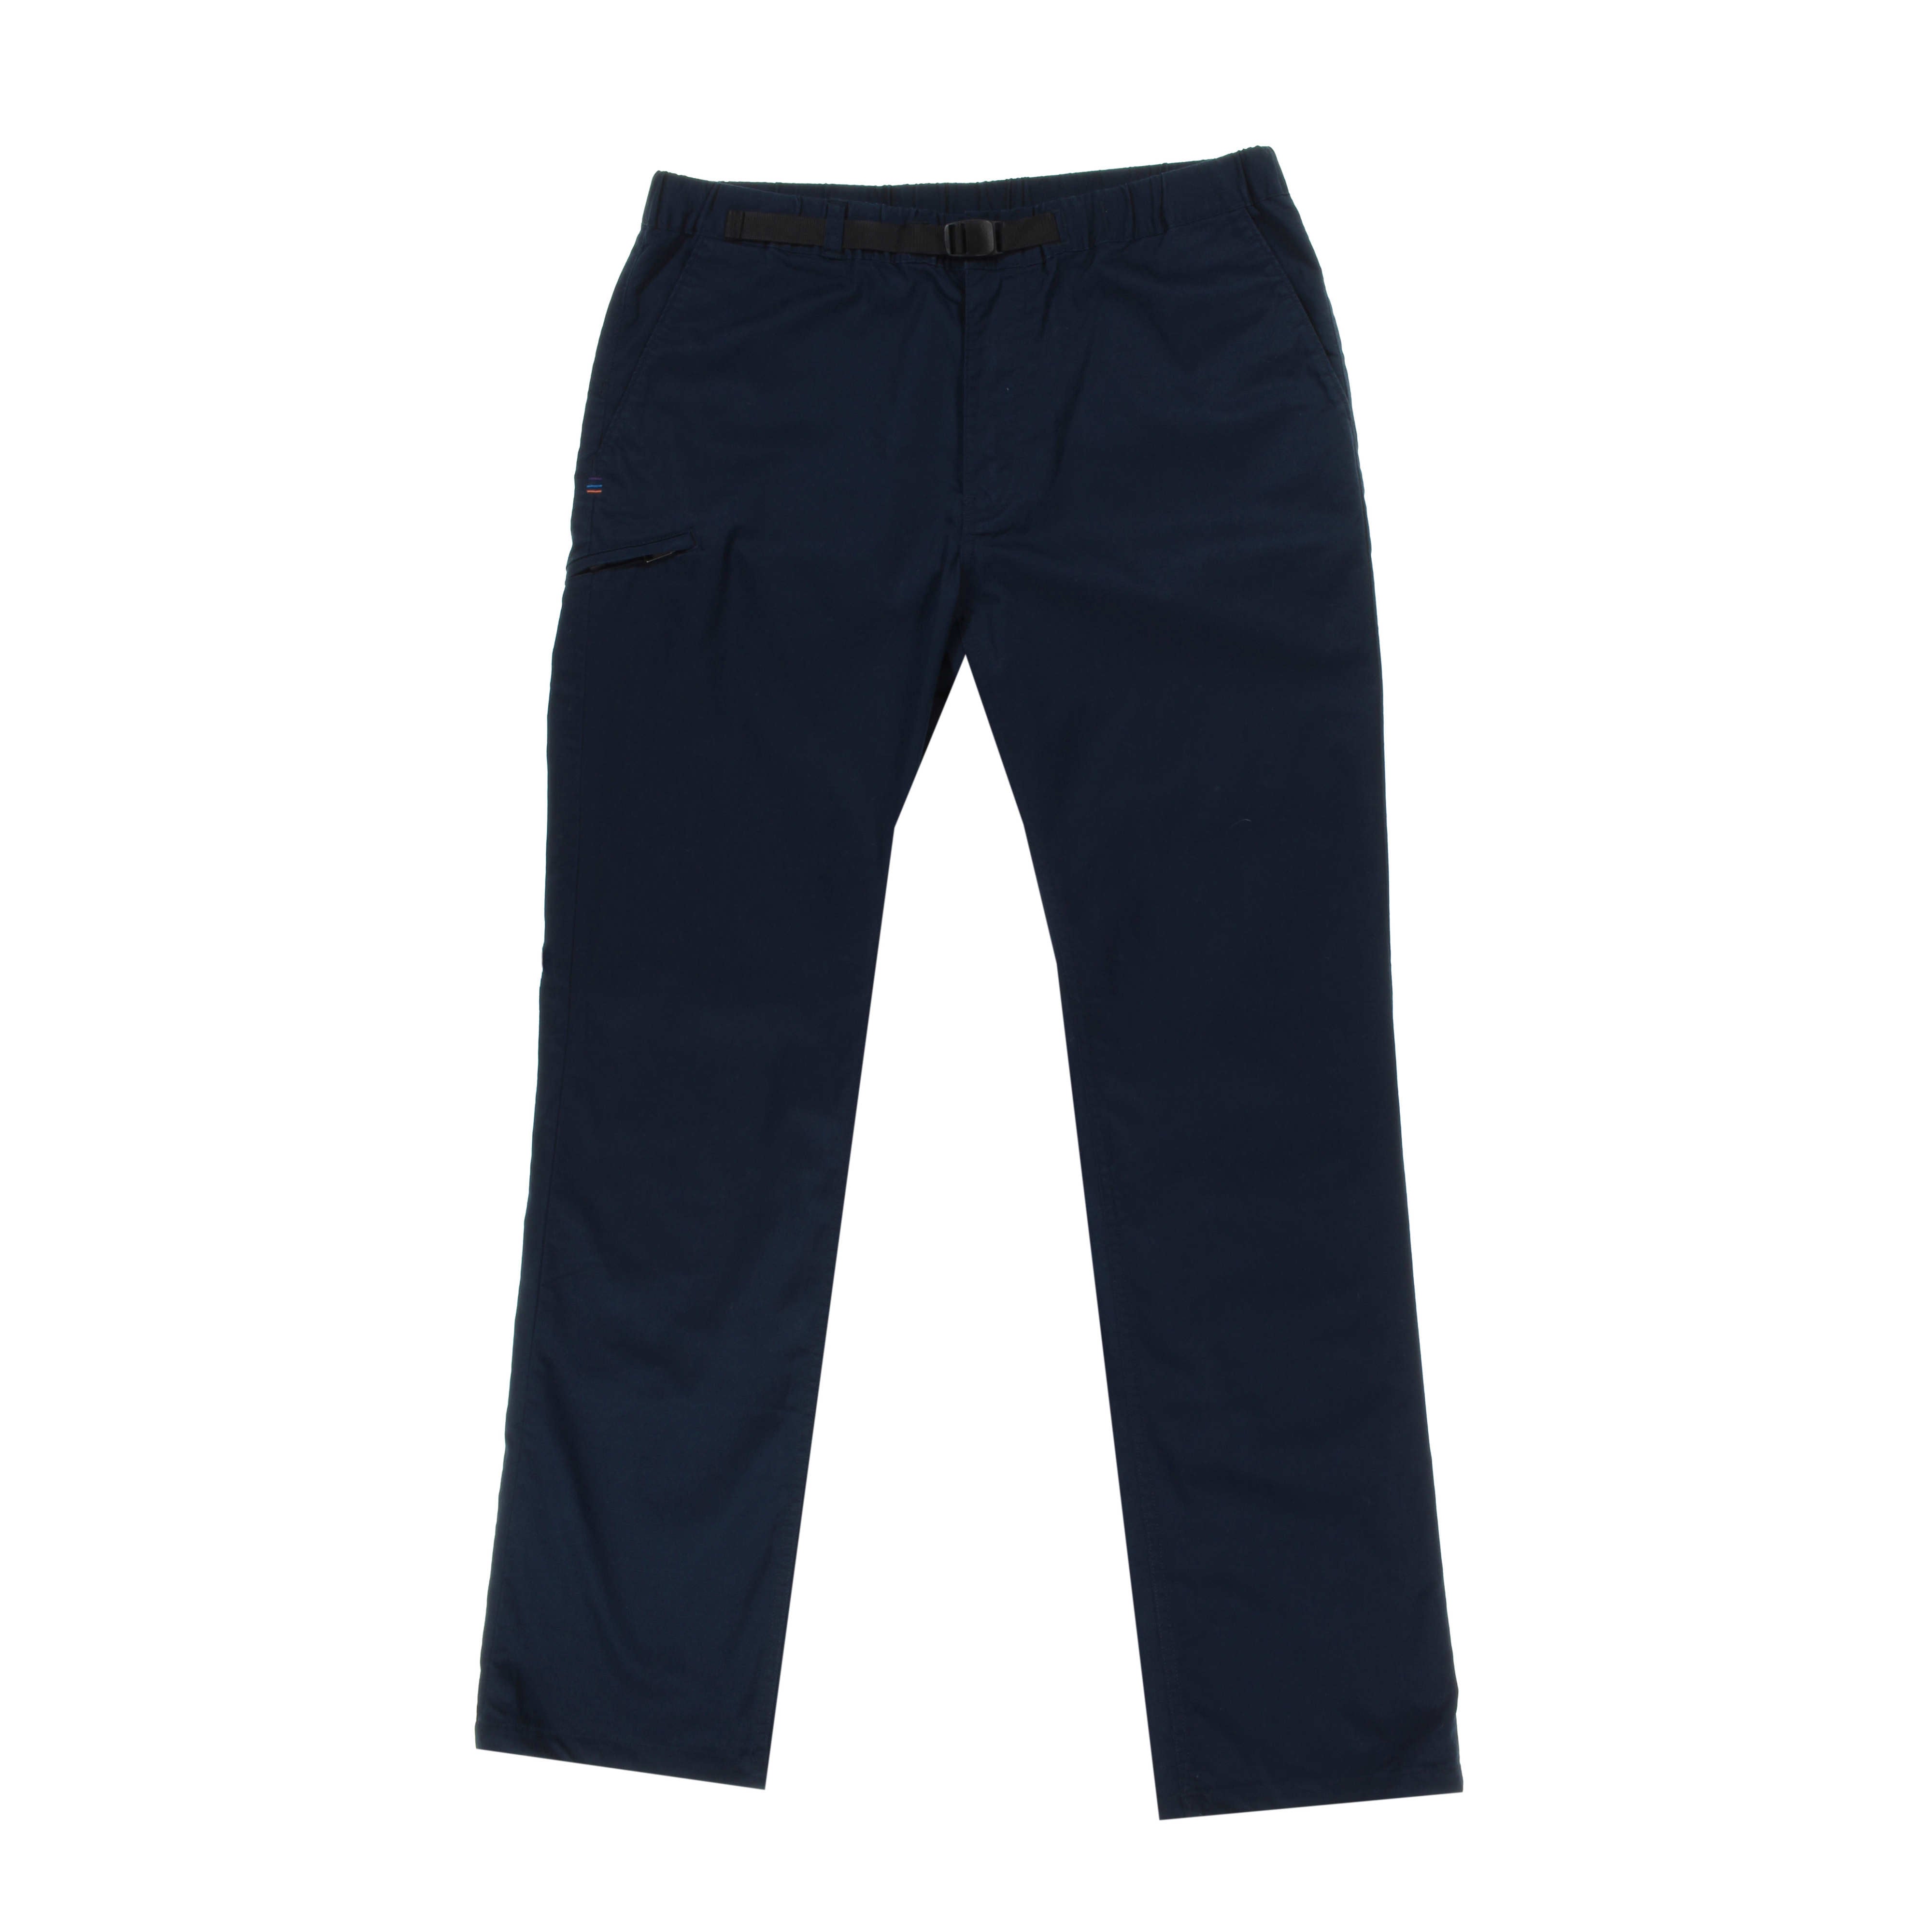 Patagonia Navy Blue Active Pants Size M - 57% off